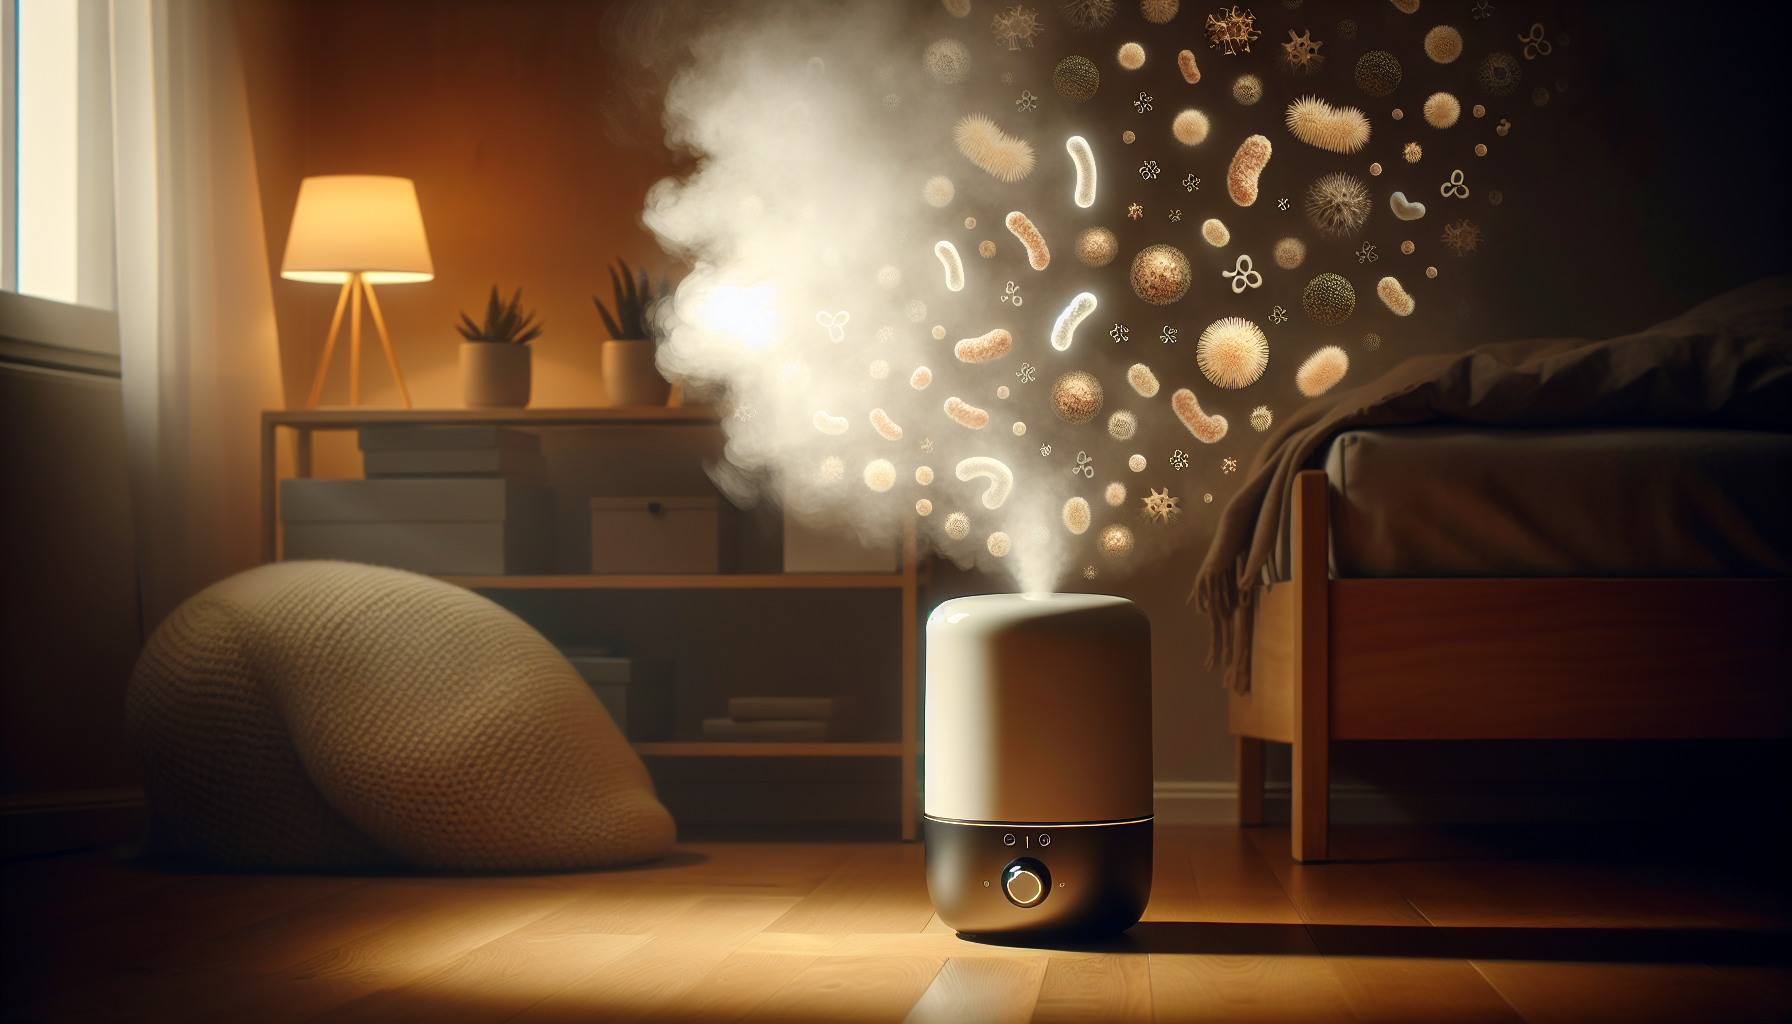 Warm mist humidifier reducing bacteria growth